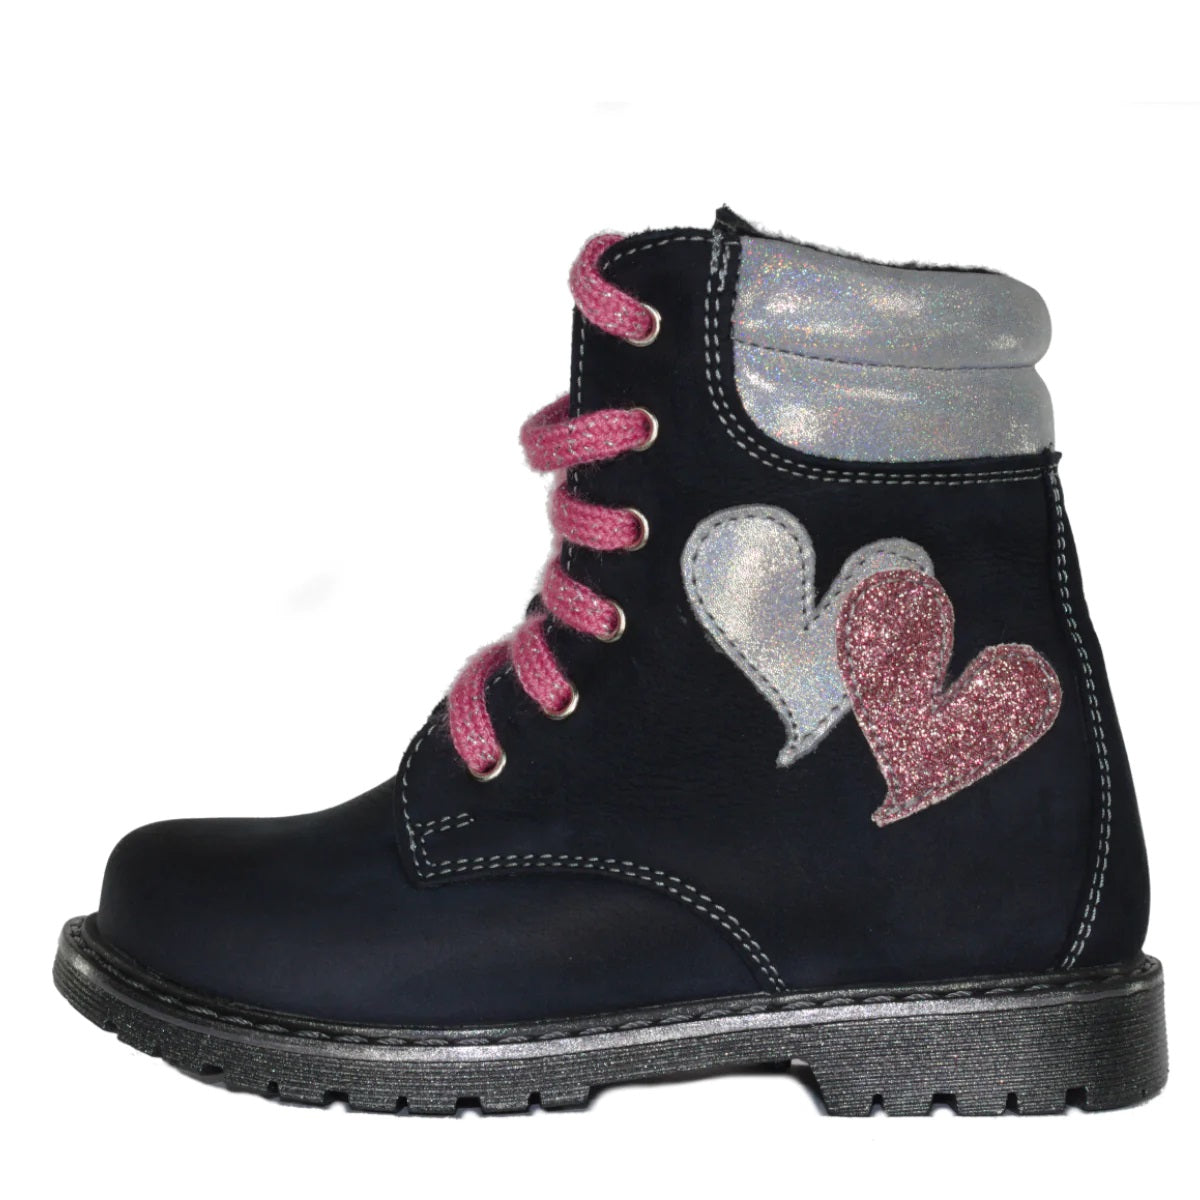 Szamos Kid Girl Boots Black With White And Pink Heart Decor - Made In Europe - shoekid.ca